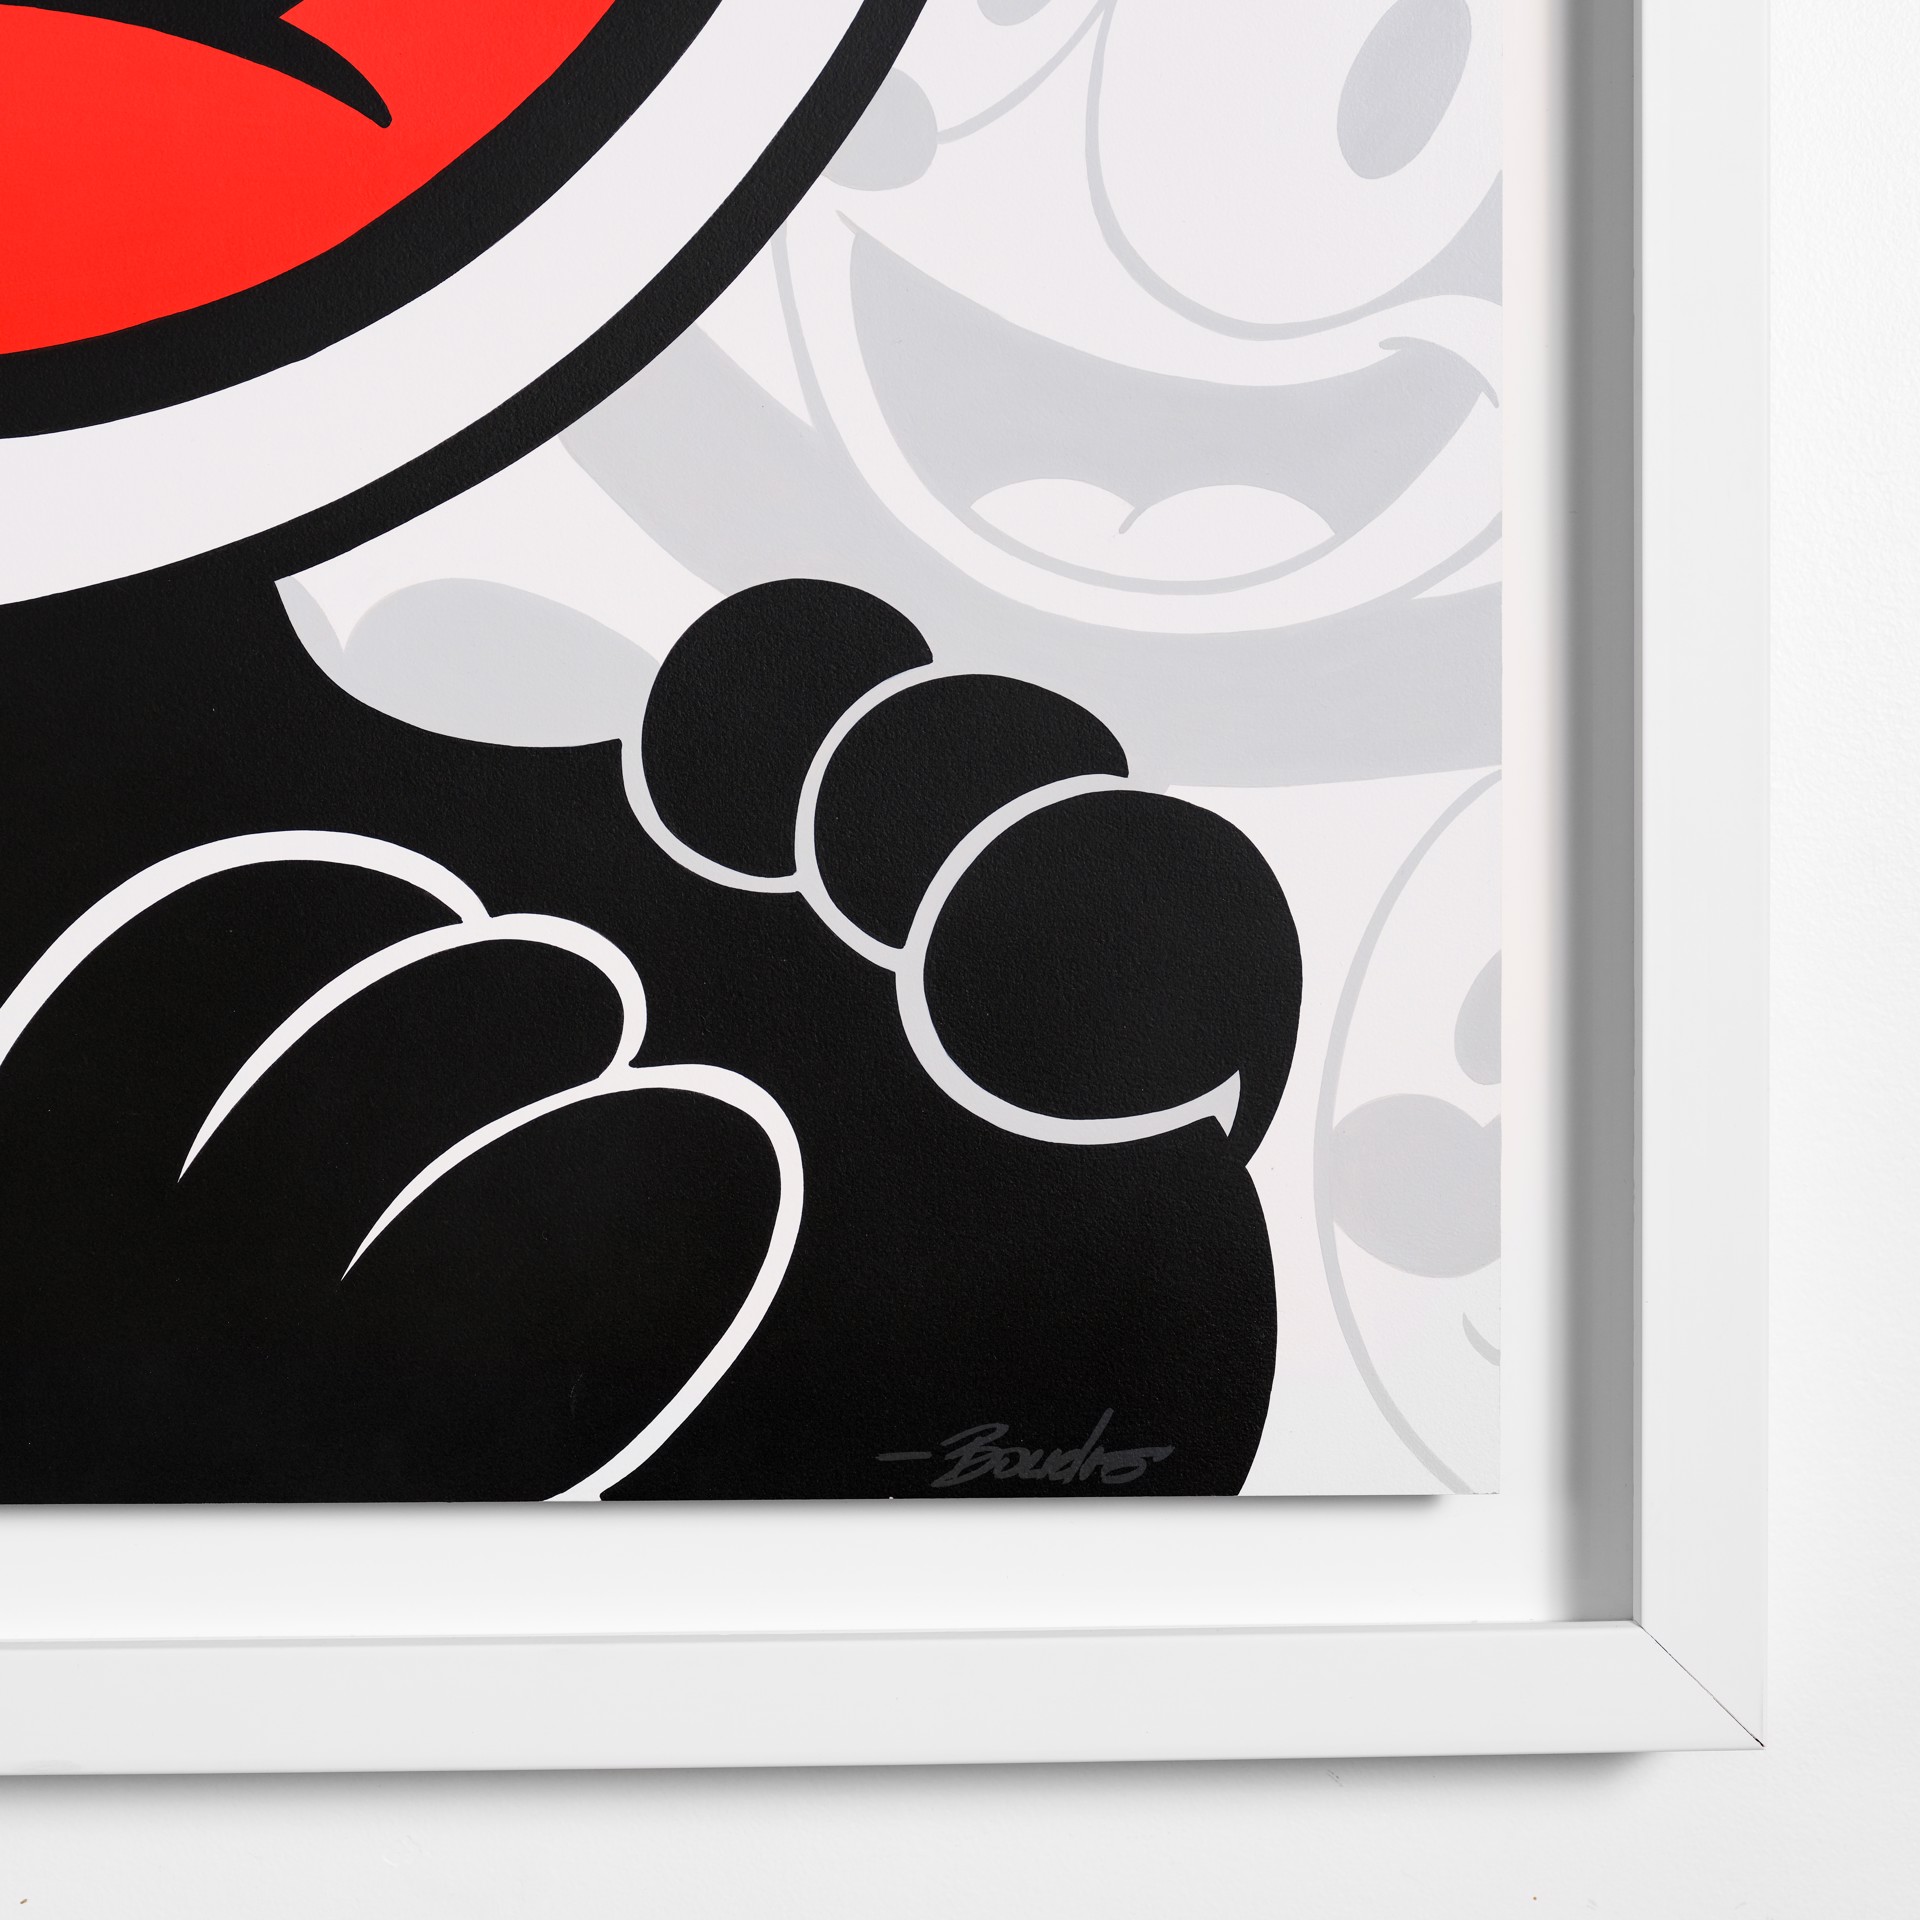 Felix the Cat by Boudro